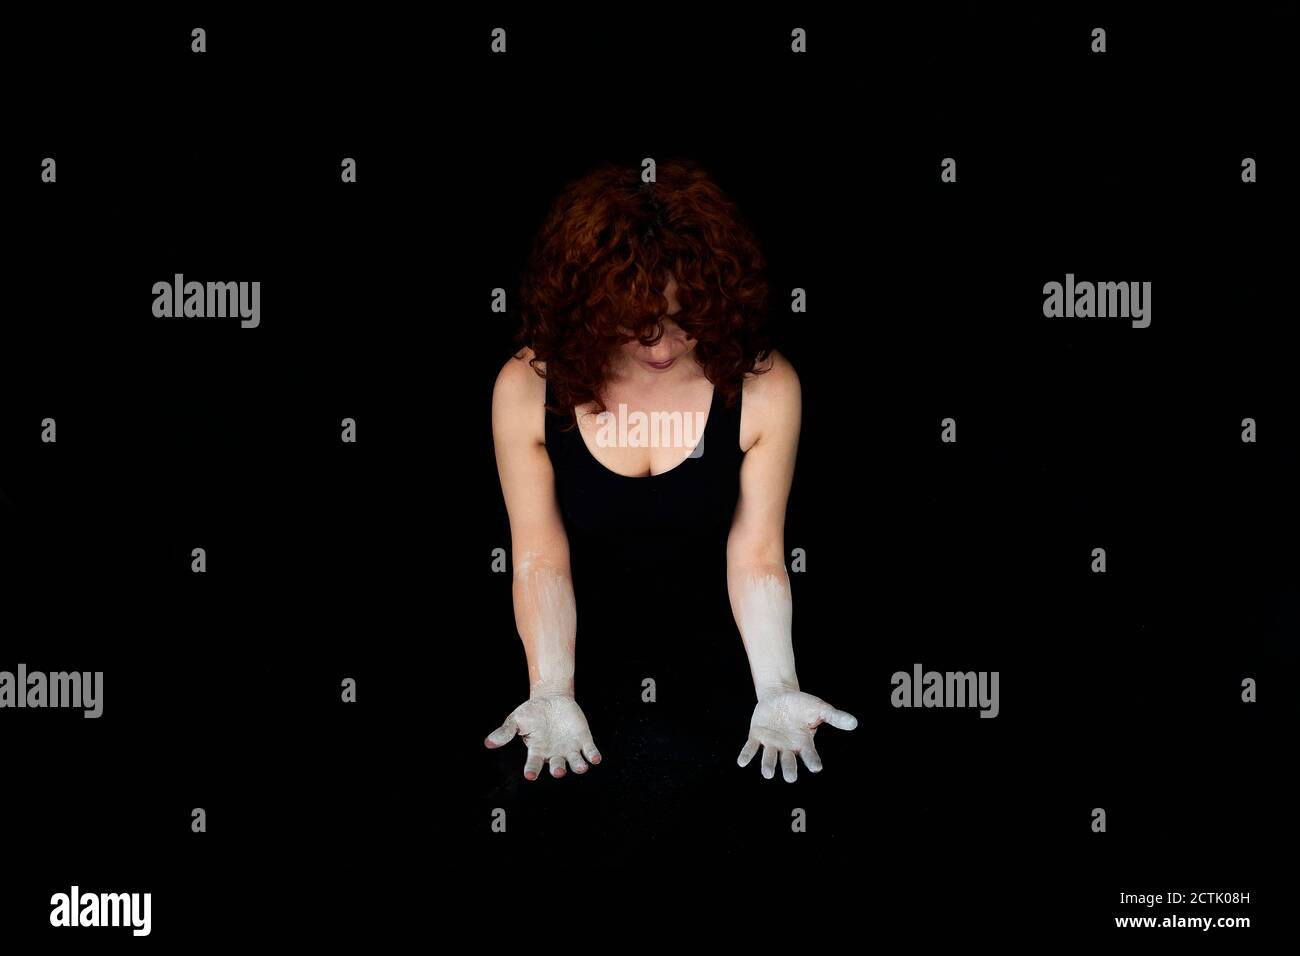 Woman with hands covered with white dust standing against black background Stock Photo